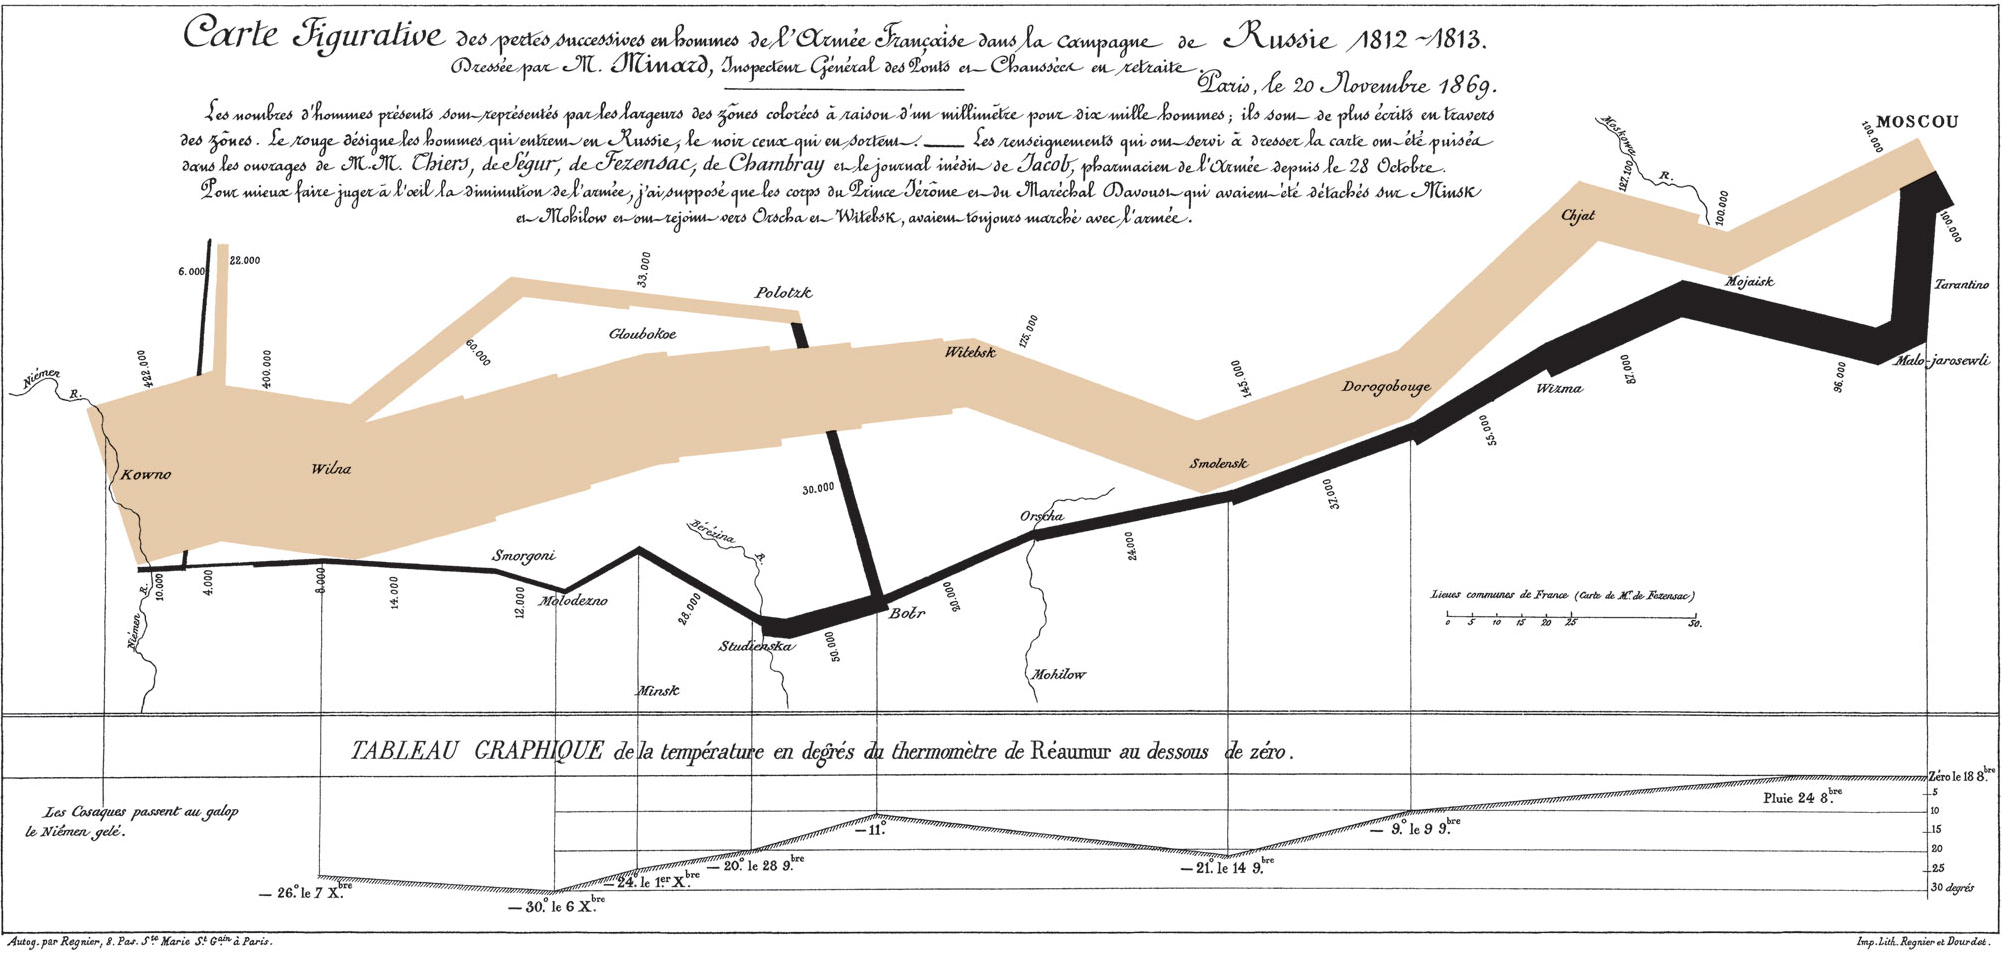 This map of Napoleon's Russian campaign shows a pink block for Napoleon's march on Russia and a black block for dwindling army's return.